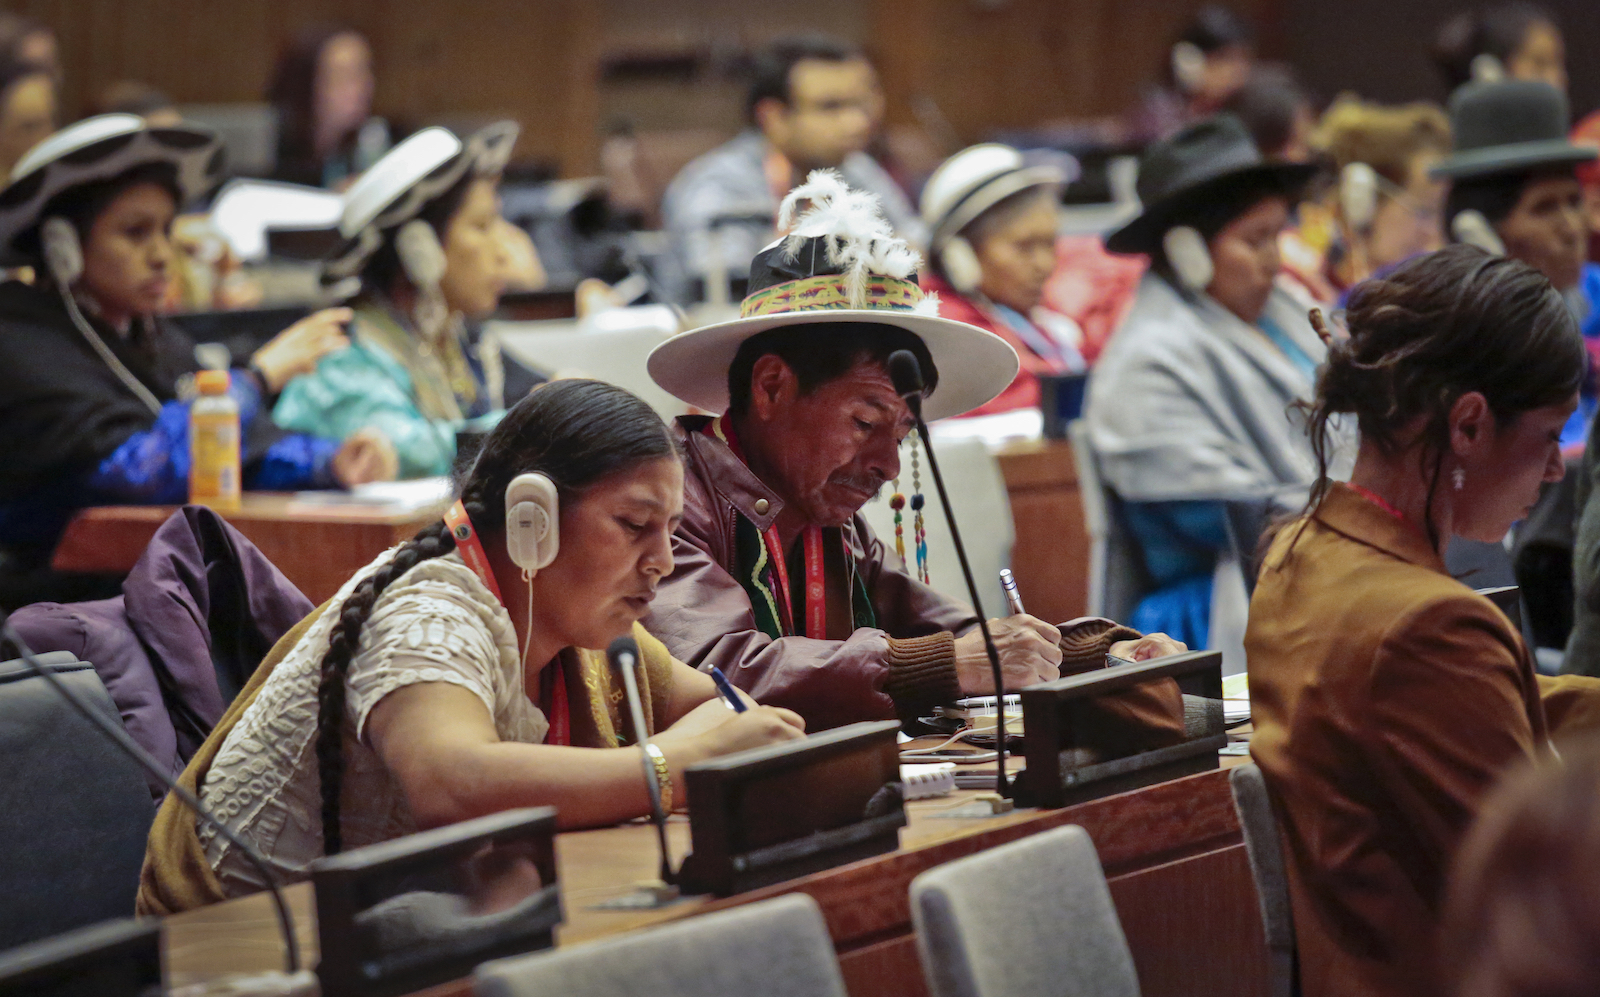 Indigenous representatives listen on headsets and take notes at the UN